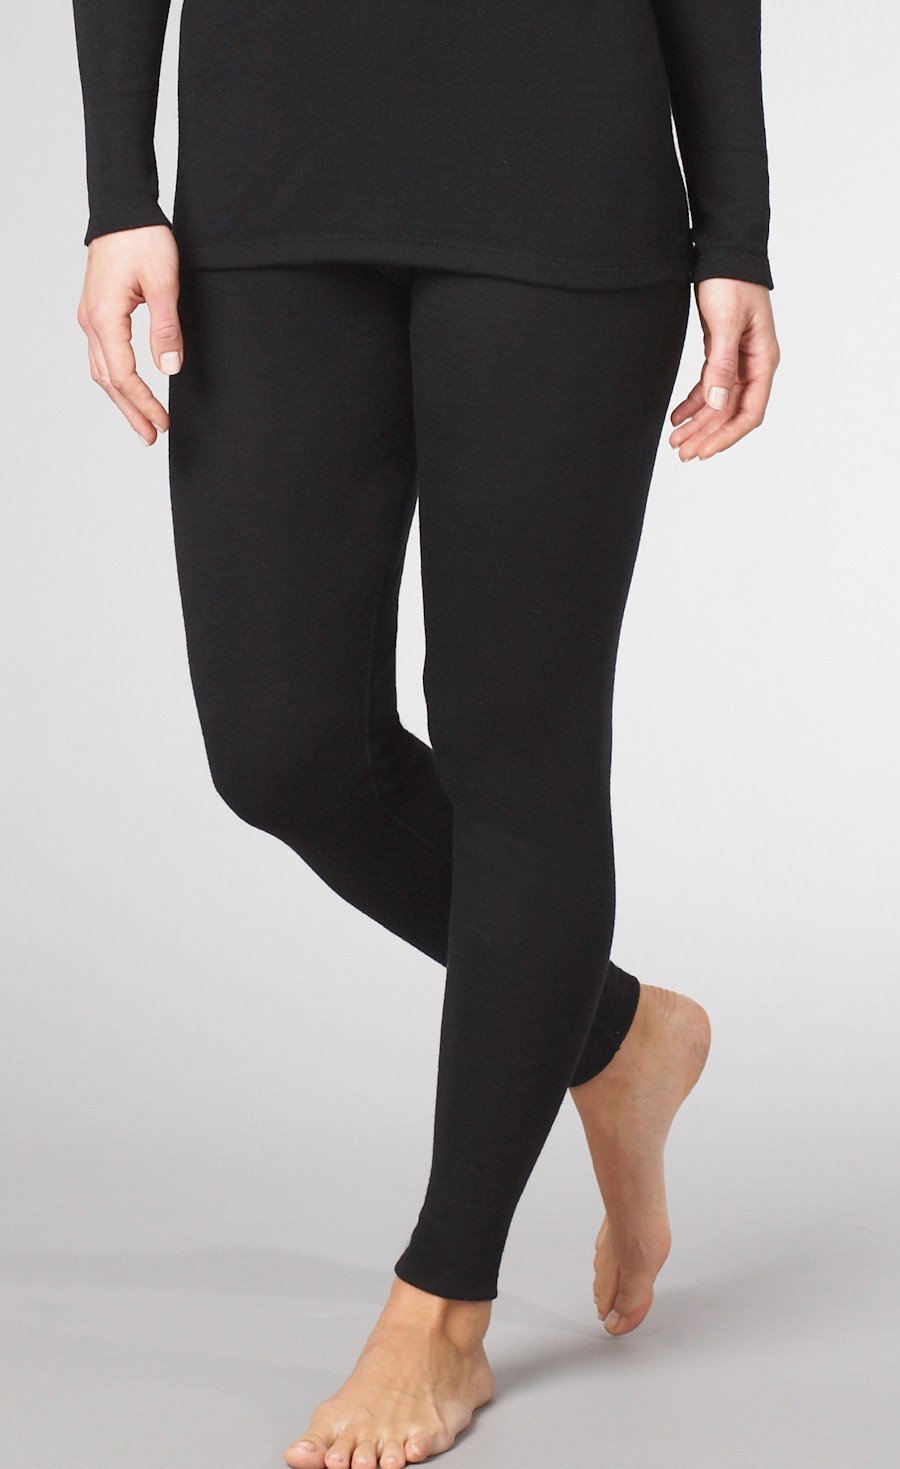 Leggings de Mujer Colección Chill Chasers (Cotton Rib)